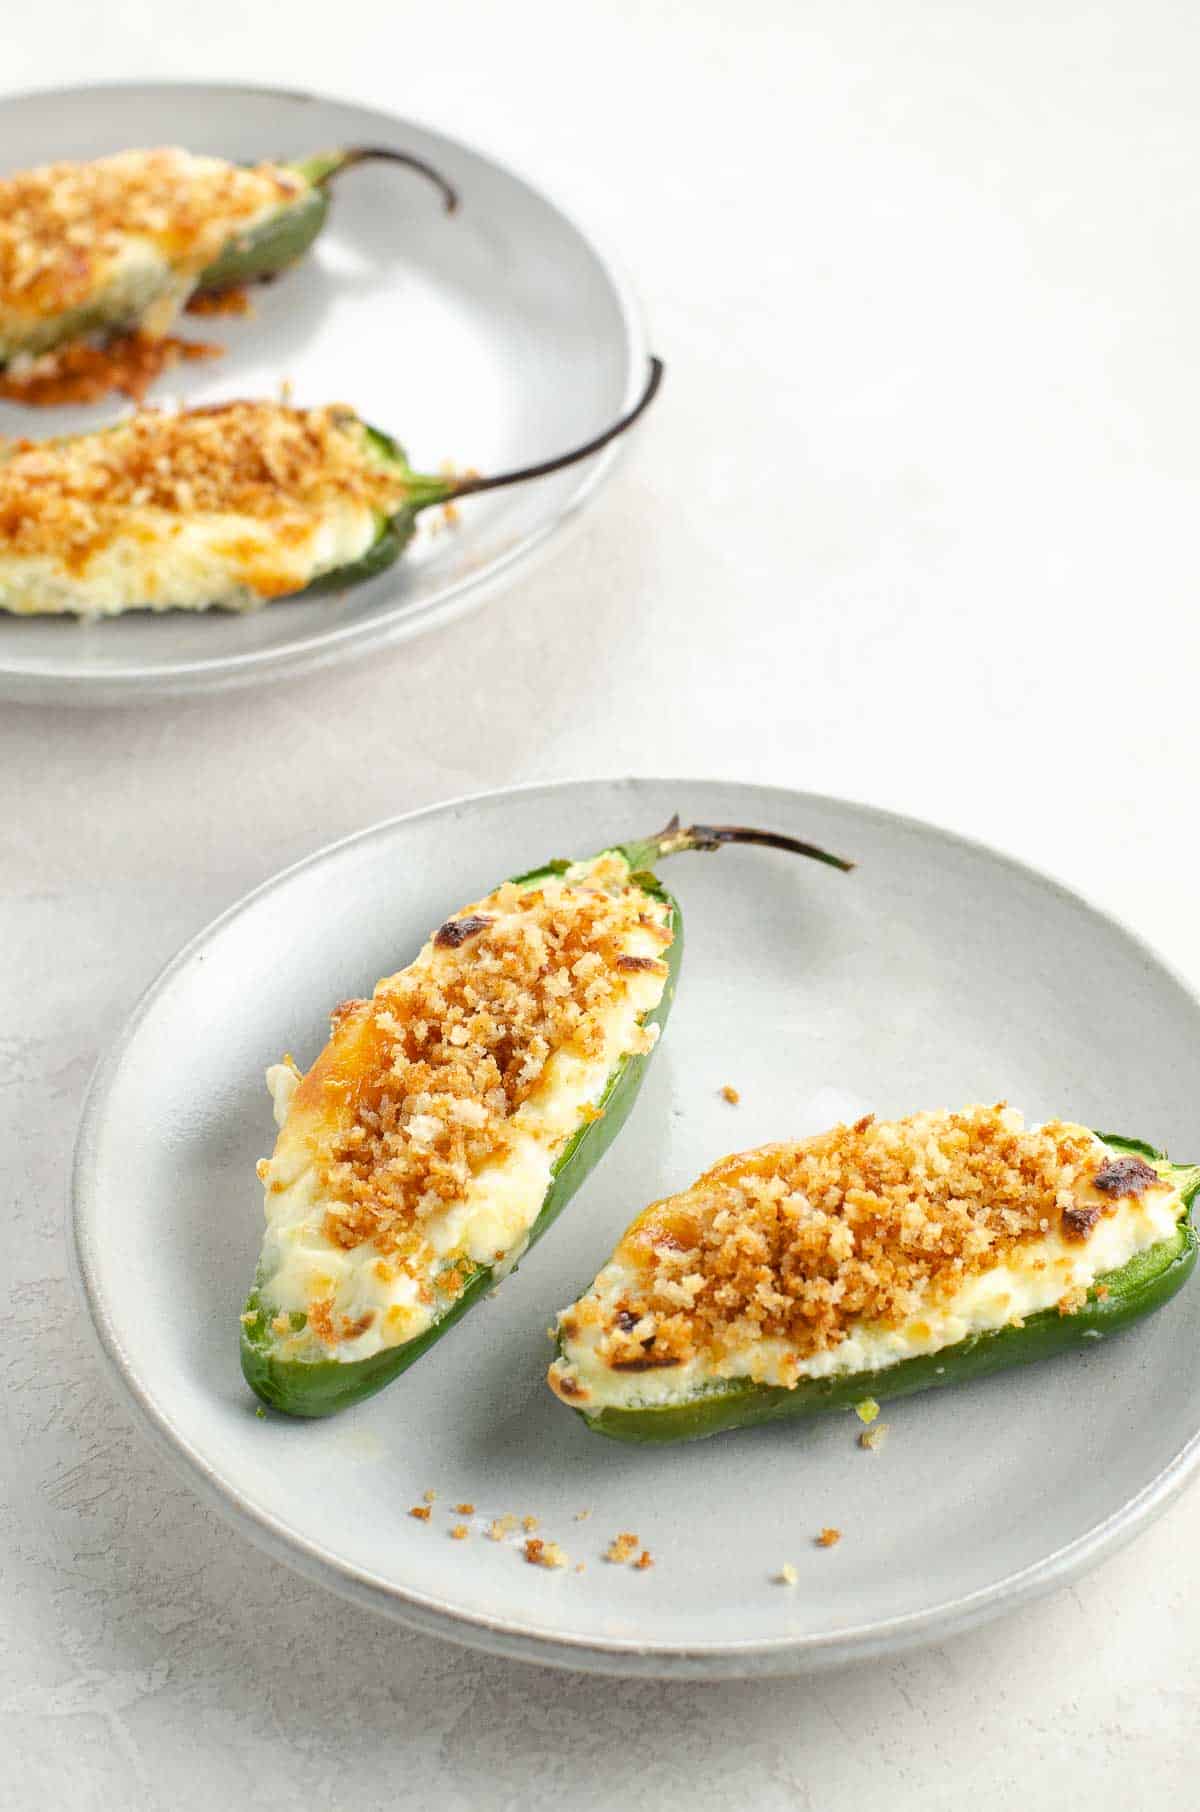 baked jalapeno poppers on plates